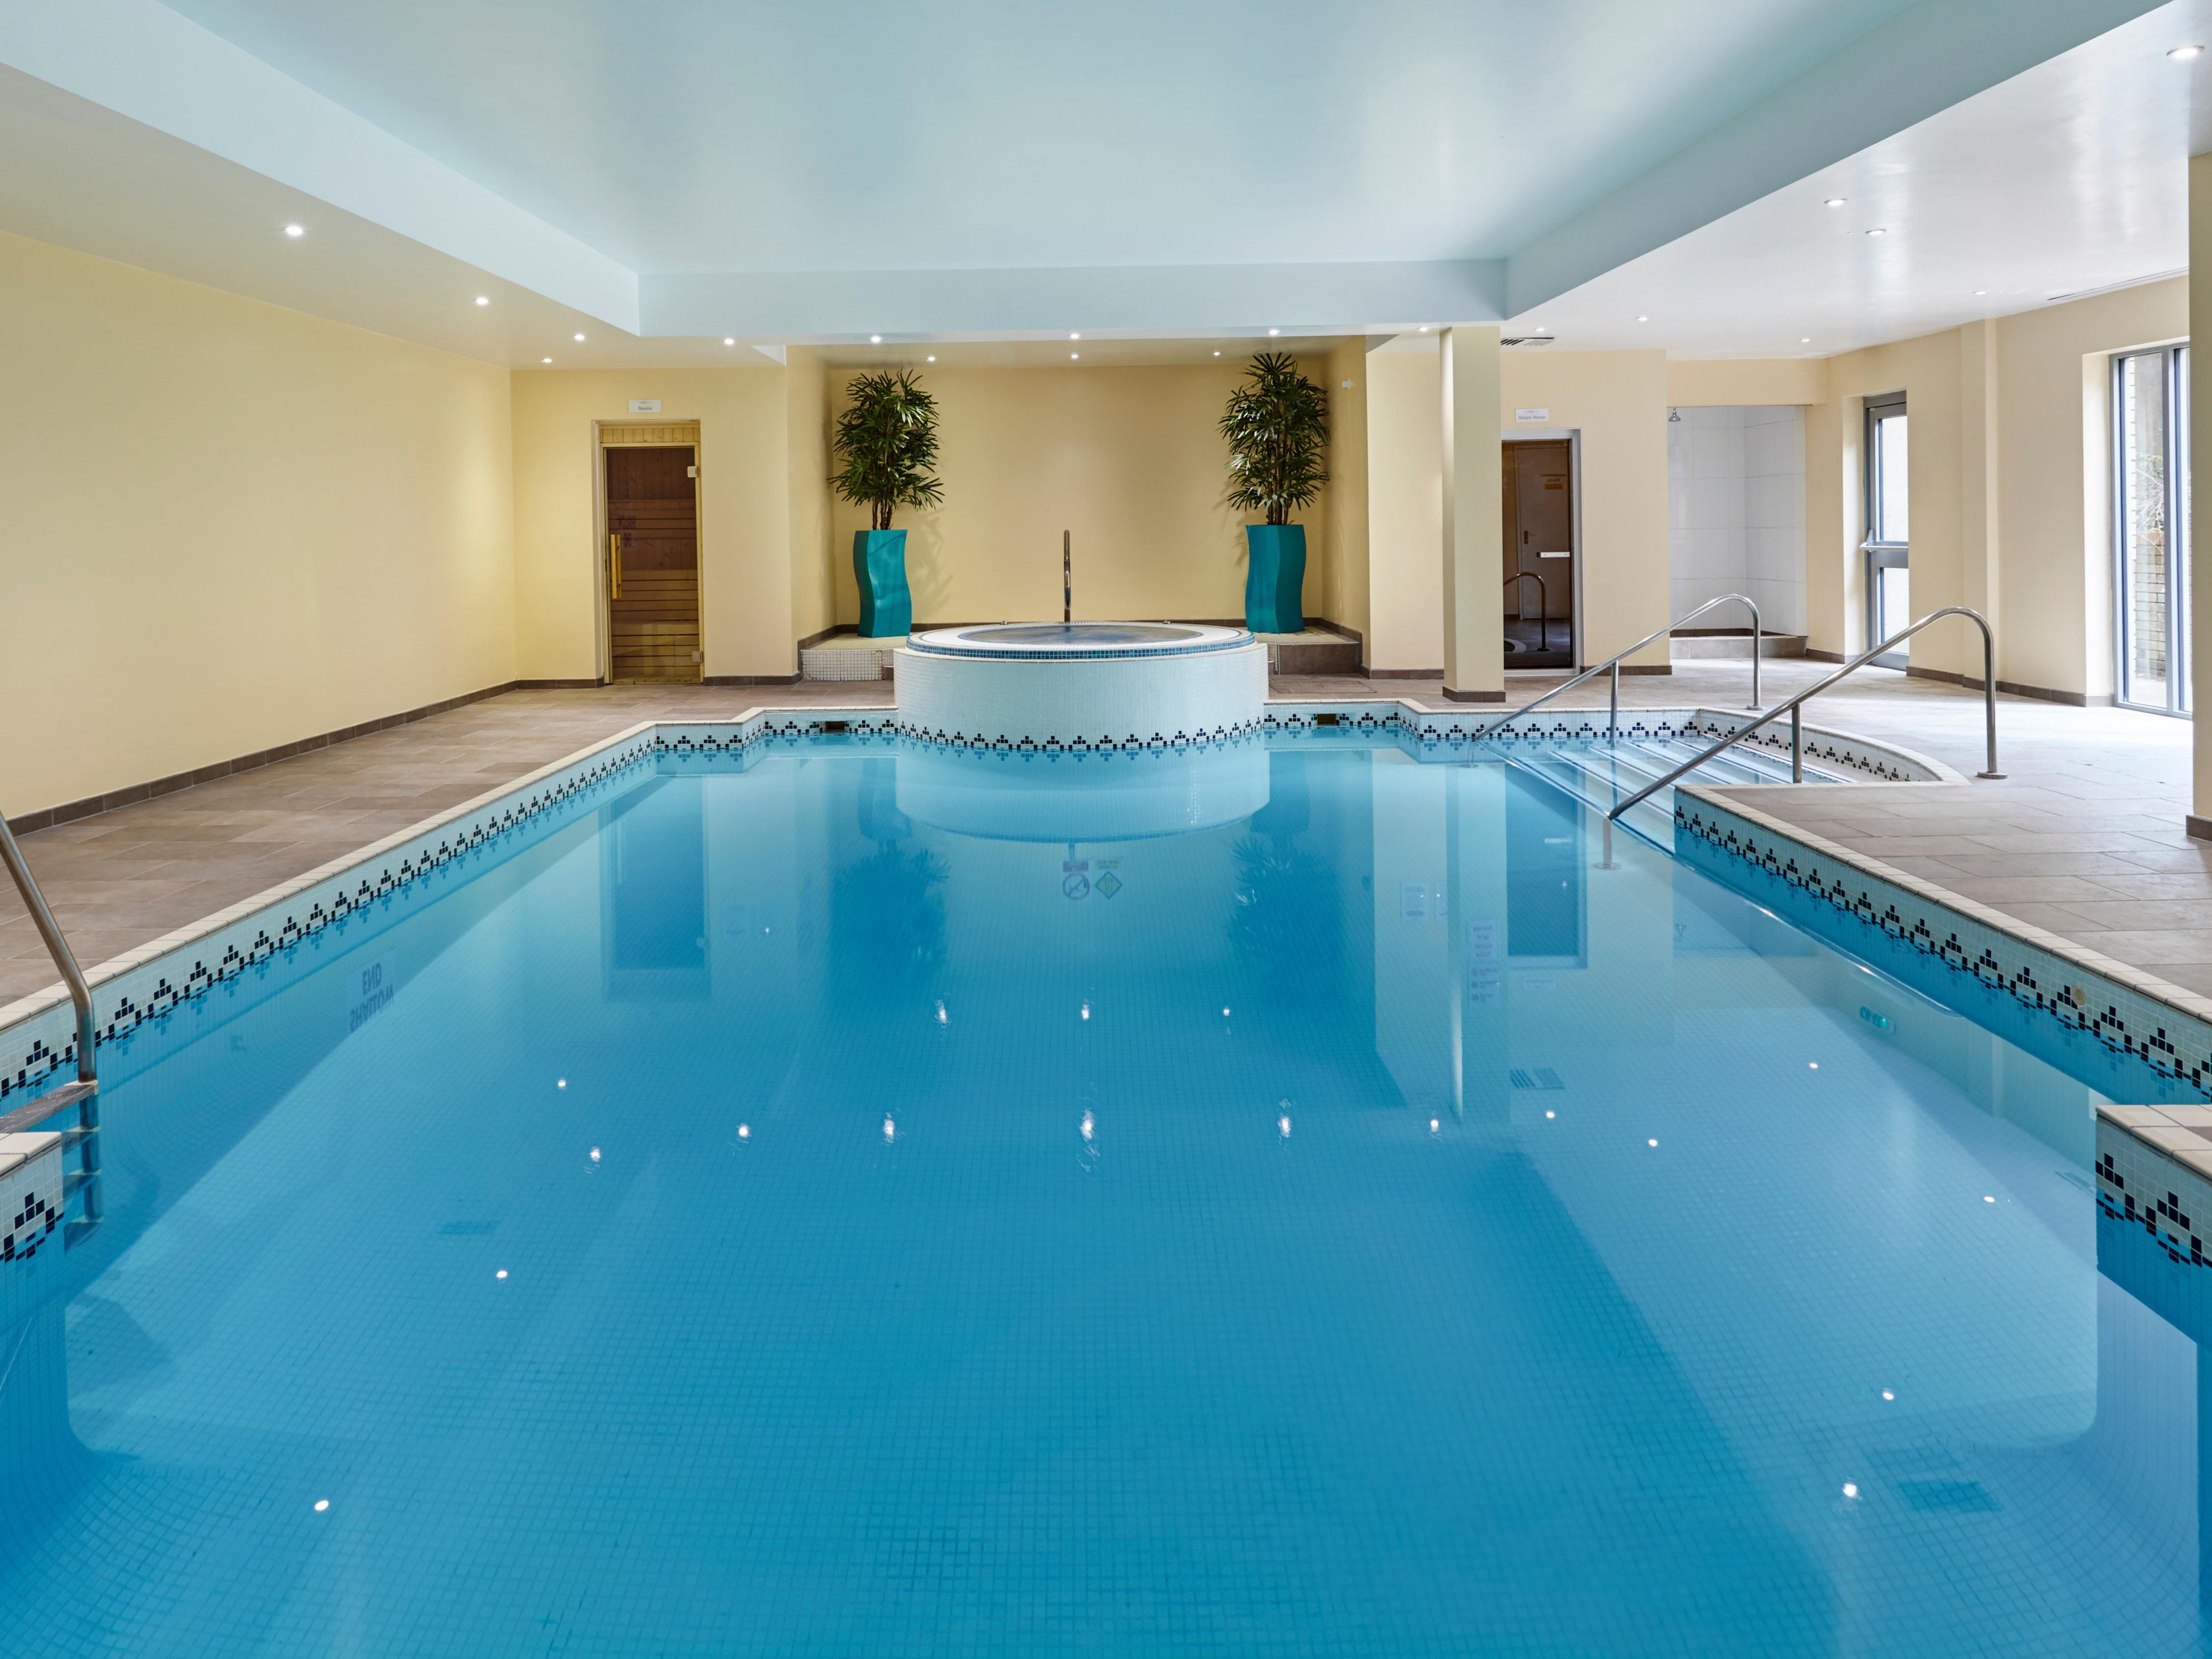 10 metre Indoor heated swimming pool free for all hotel to use  situated on lower ground floor of hotel